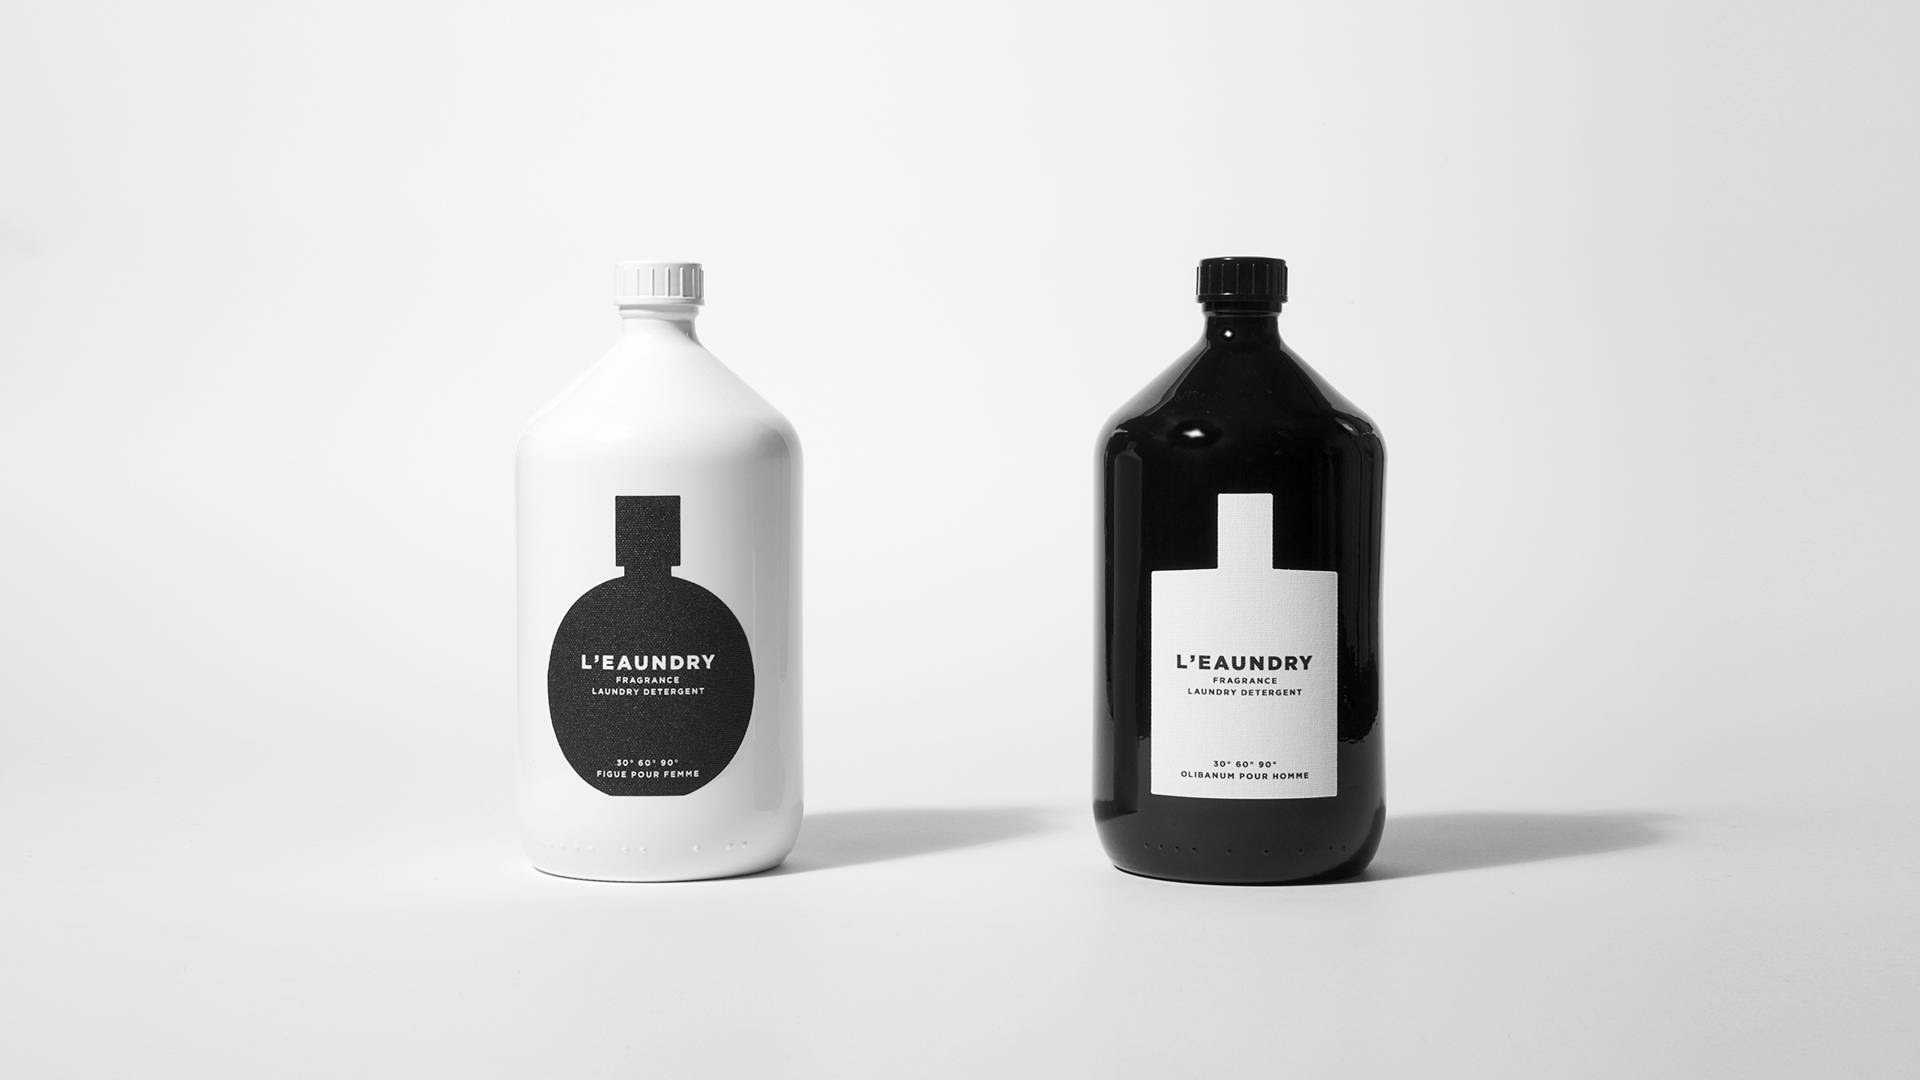 Featured image for L’eaundry. Fragrance Laundry Detergent